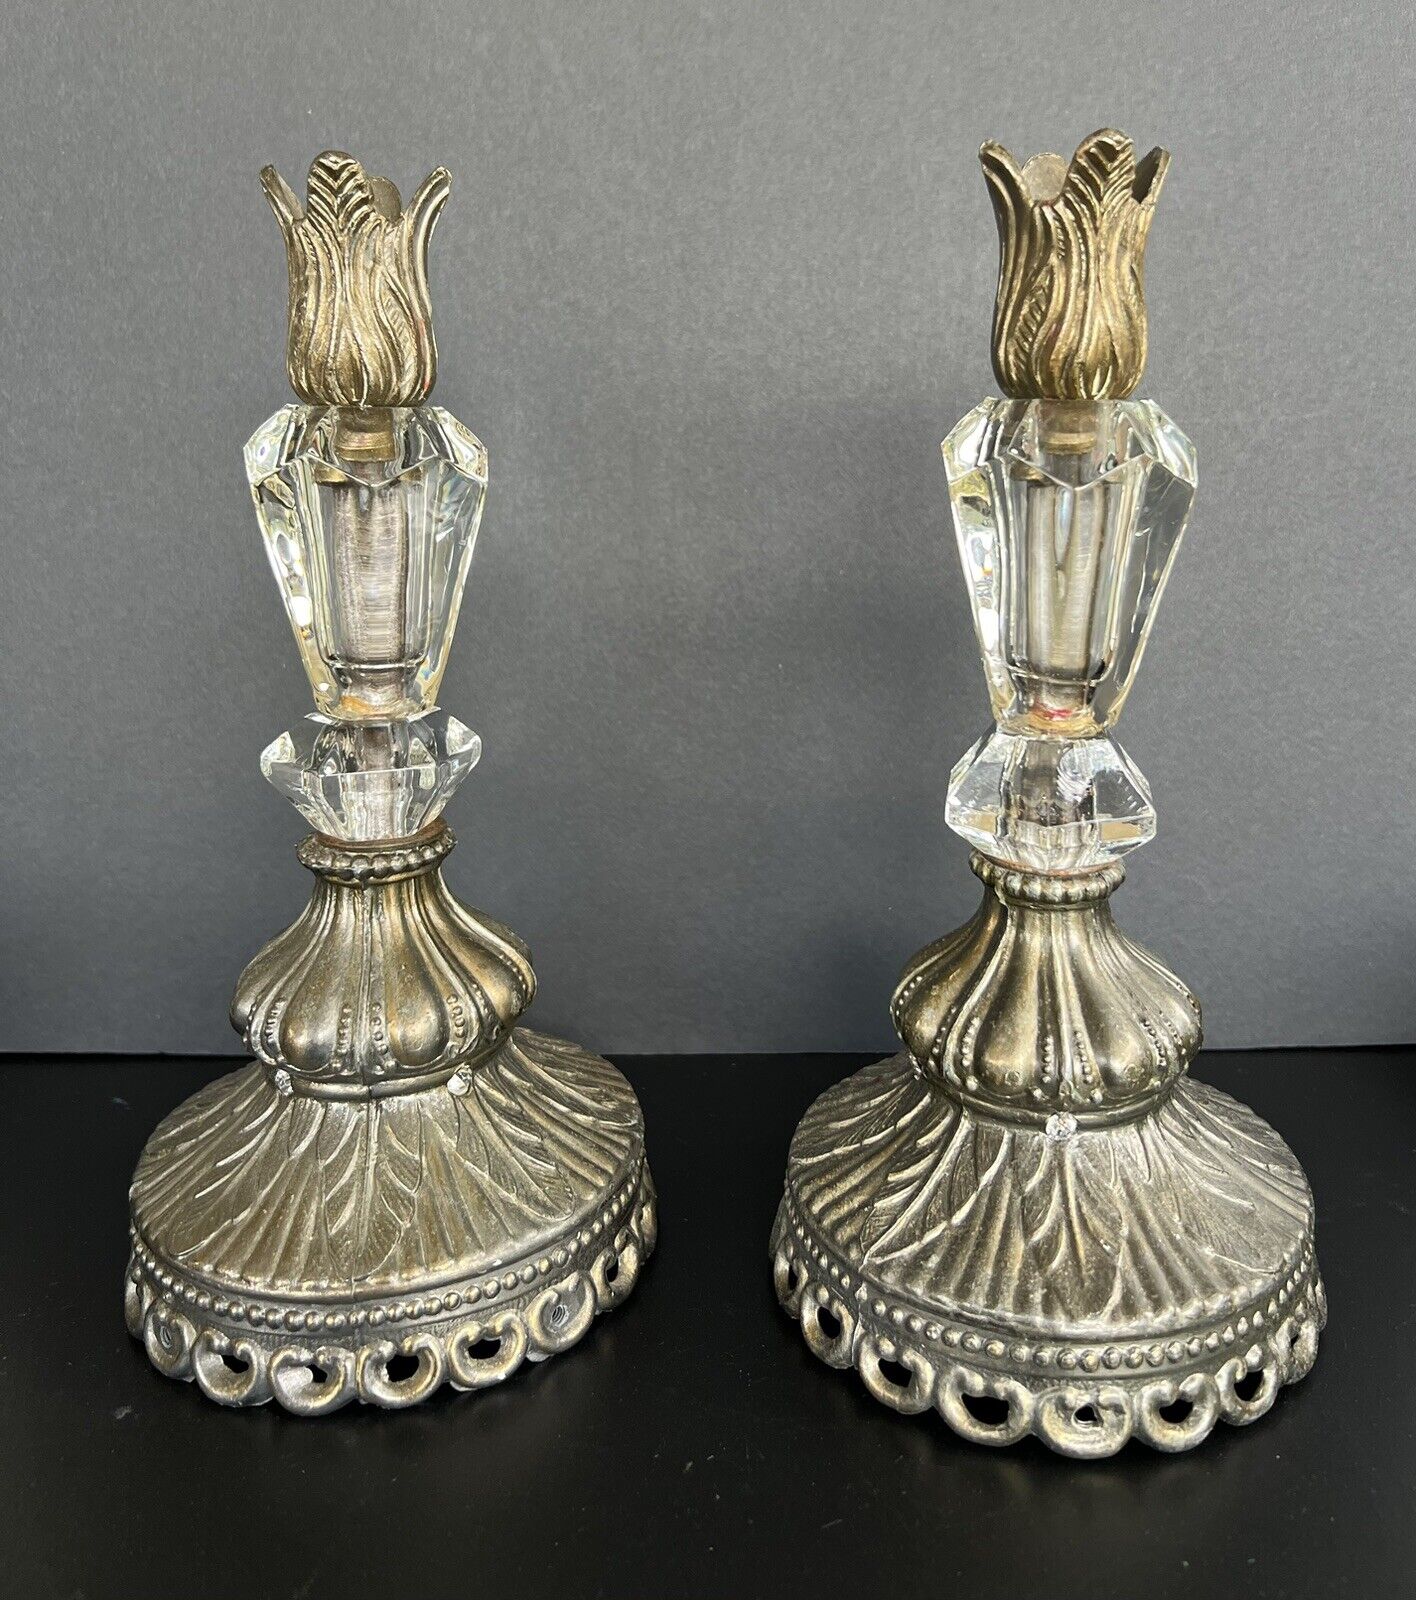 Pair Of Elegant Victorian Crystal And Ornate Metal Bronze Candle Holders